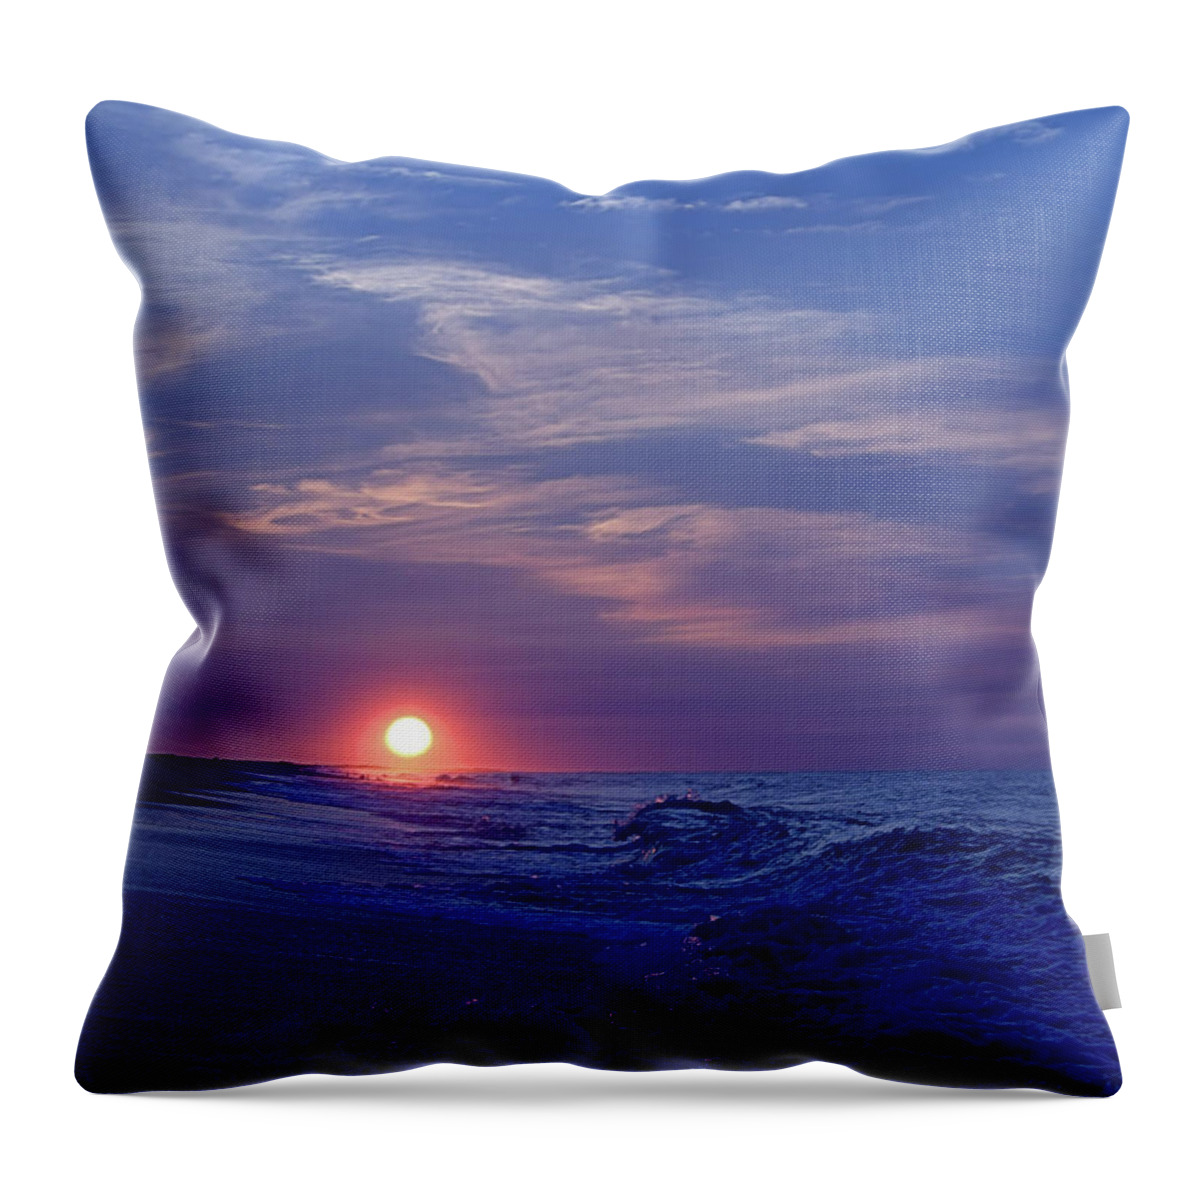 Seas Throw Pillow featuring the photograph Summer Sunrise I I by Newwwman